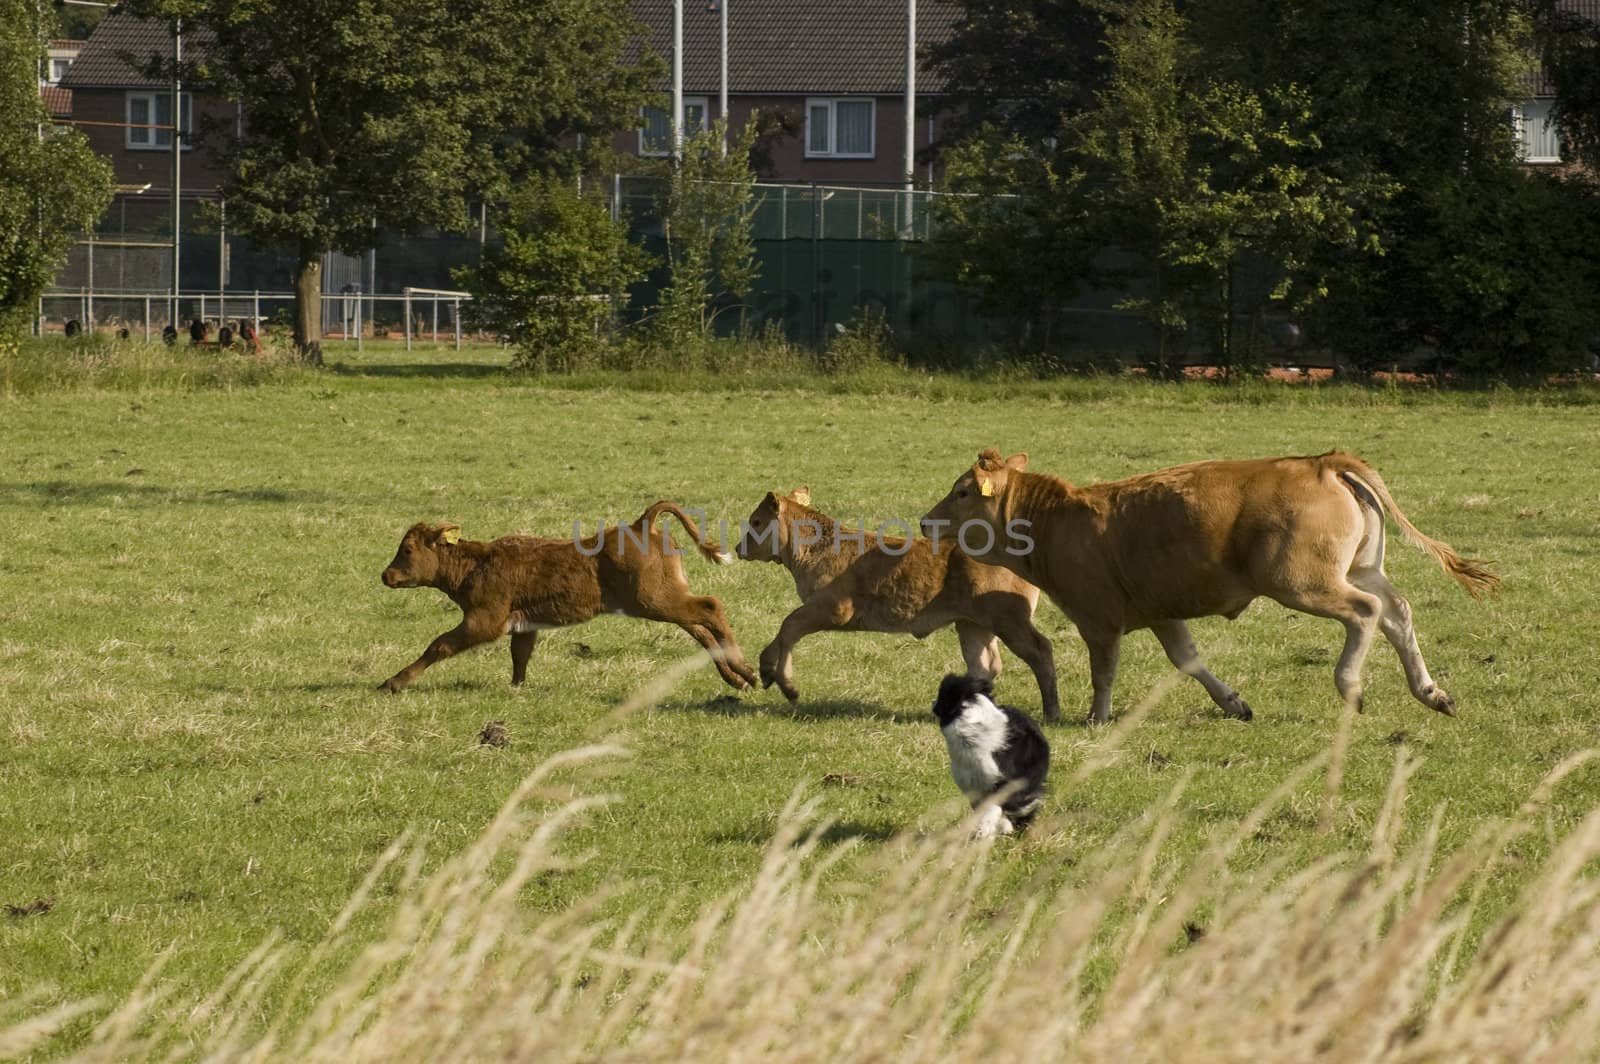 Running cow and calfs organized by a dog by ladyminnie